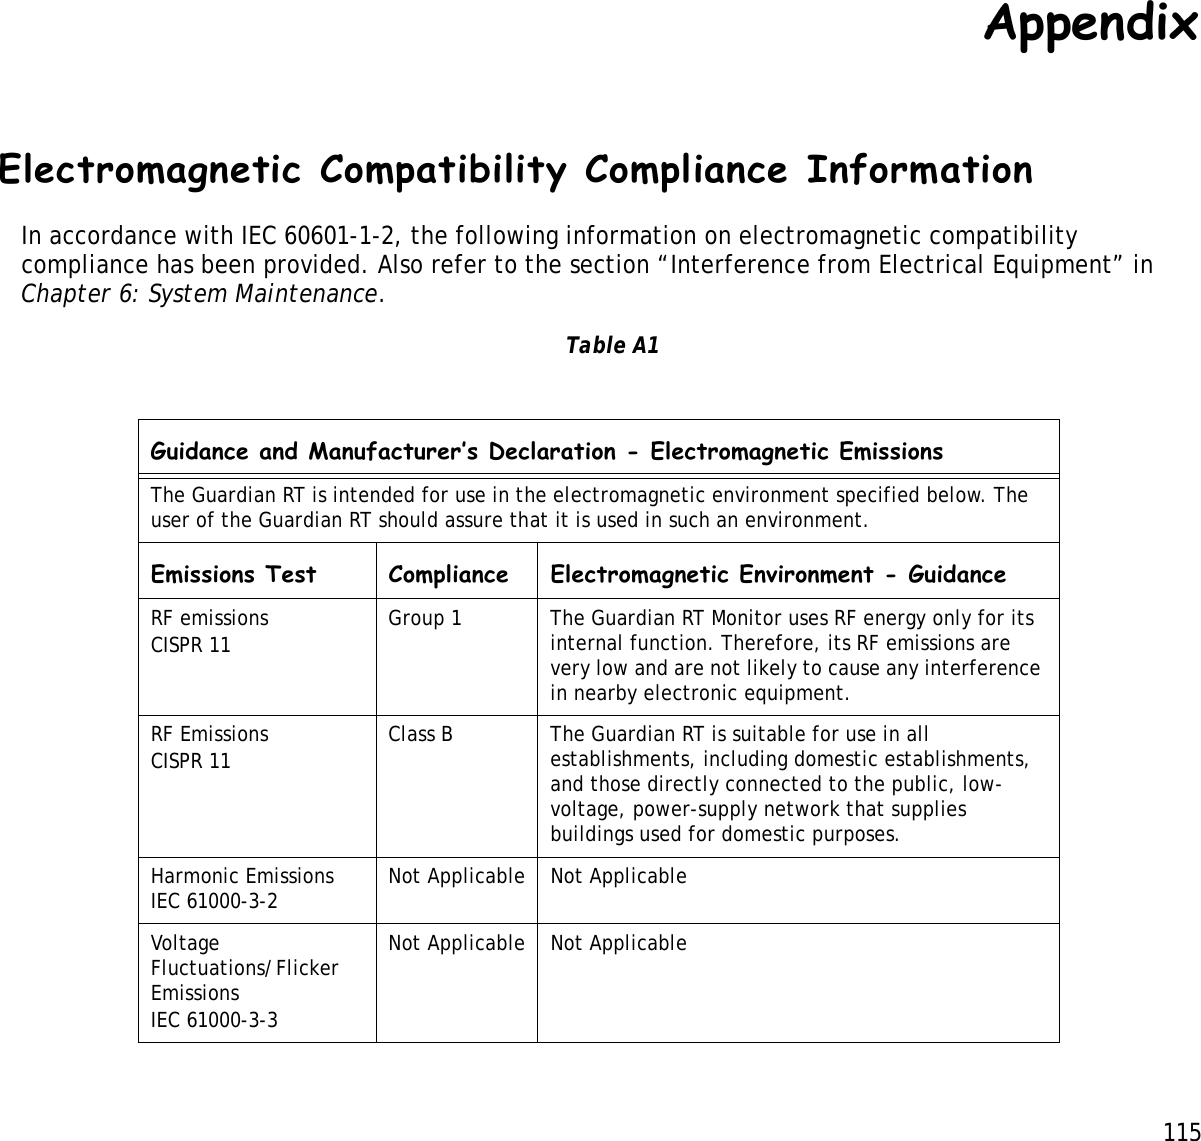 115 AppendixElectromagnetic Compatibility Compliance InformationIn accordance with IEC 60601-1-2, the following information on electromagnetic compatibility compliance has been provided. Also refer to the section “Interference from Electrical Equipment” in Chapter 6: System Maintenance. Table A1                                                                   Guidance and Manufacturer’s Declaration - Electromagnetic EmissionsThe Guardian RT is intended for use in the electromagnetic environment specified below. The user of the Guardian RT should assure that it is used in such an environment.Emissions Test Compliance Electromagnetic Environment - GuidanceRF emissionsCISPR 11 Group 1 The Guardian RT Monitor uses RF energy only for its internal function. Therefore, its RF emissions are very low and are not likely to cause any interference in nearby electronic equipment.RF EmissionsCISPR 11 Class B The Guardian RT is suitable for use in all establishments, including domestic establishments, and those directly connected to the public, low-voltage, power-supply network that supplies buildings used for domestic purposes.Harmonic EmissionsIEC 61000-3-2 Not Applicable Not ApplicableVoltage Fluctuations/Flicker EmissionsIEC 61000-3-3Not Applicable Not Applicable